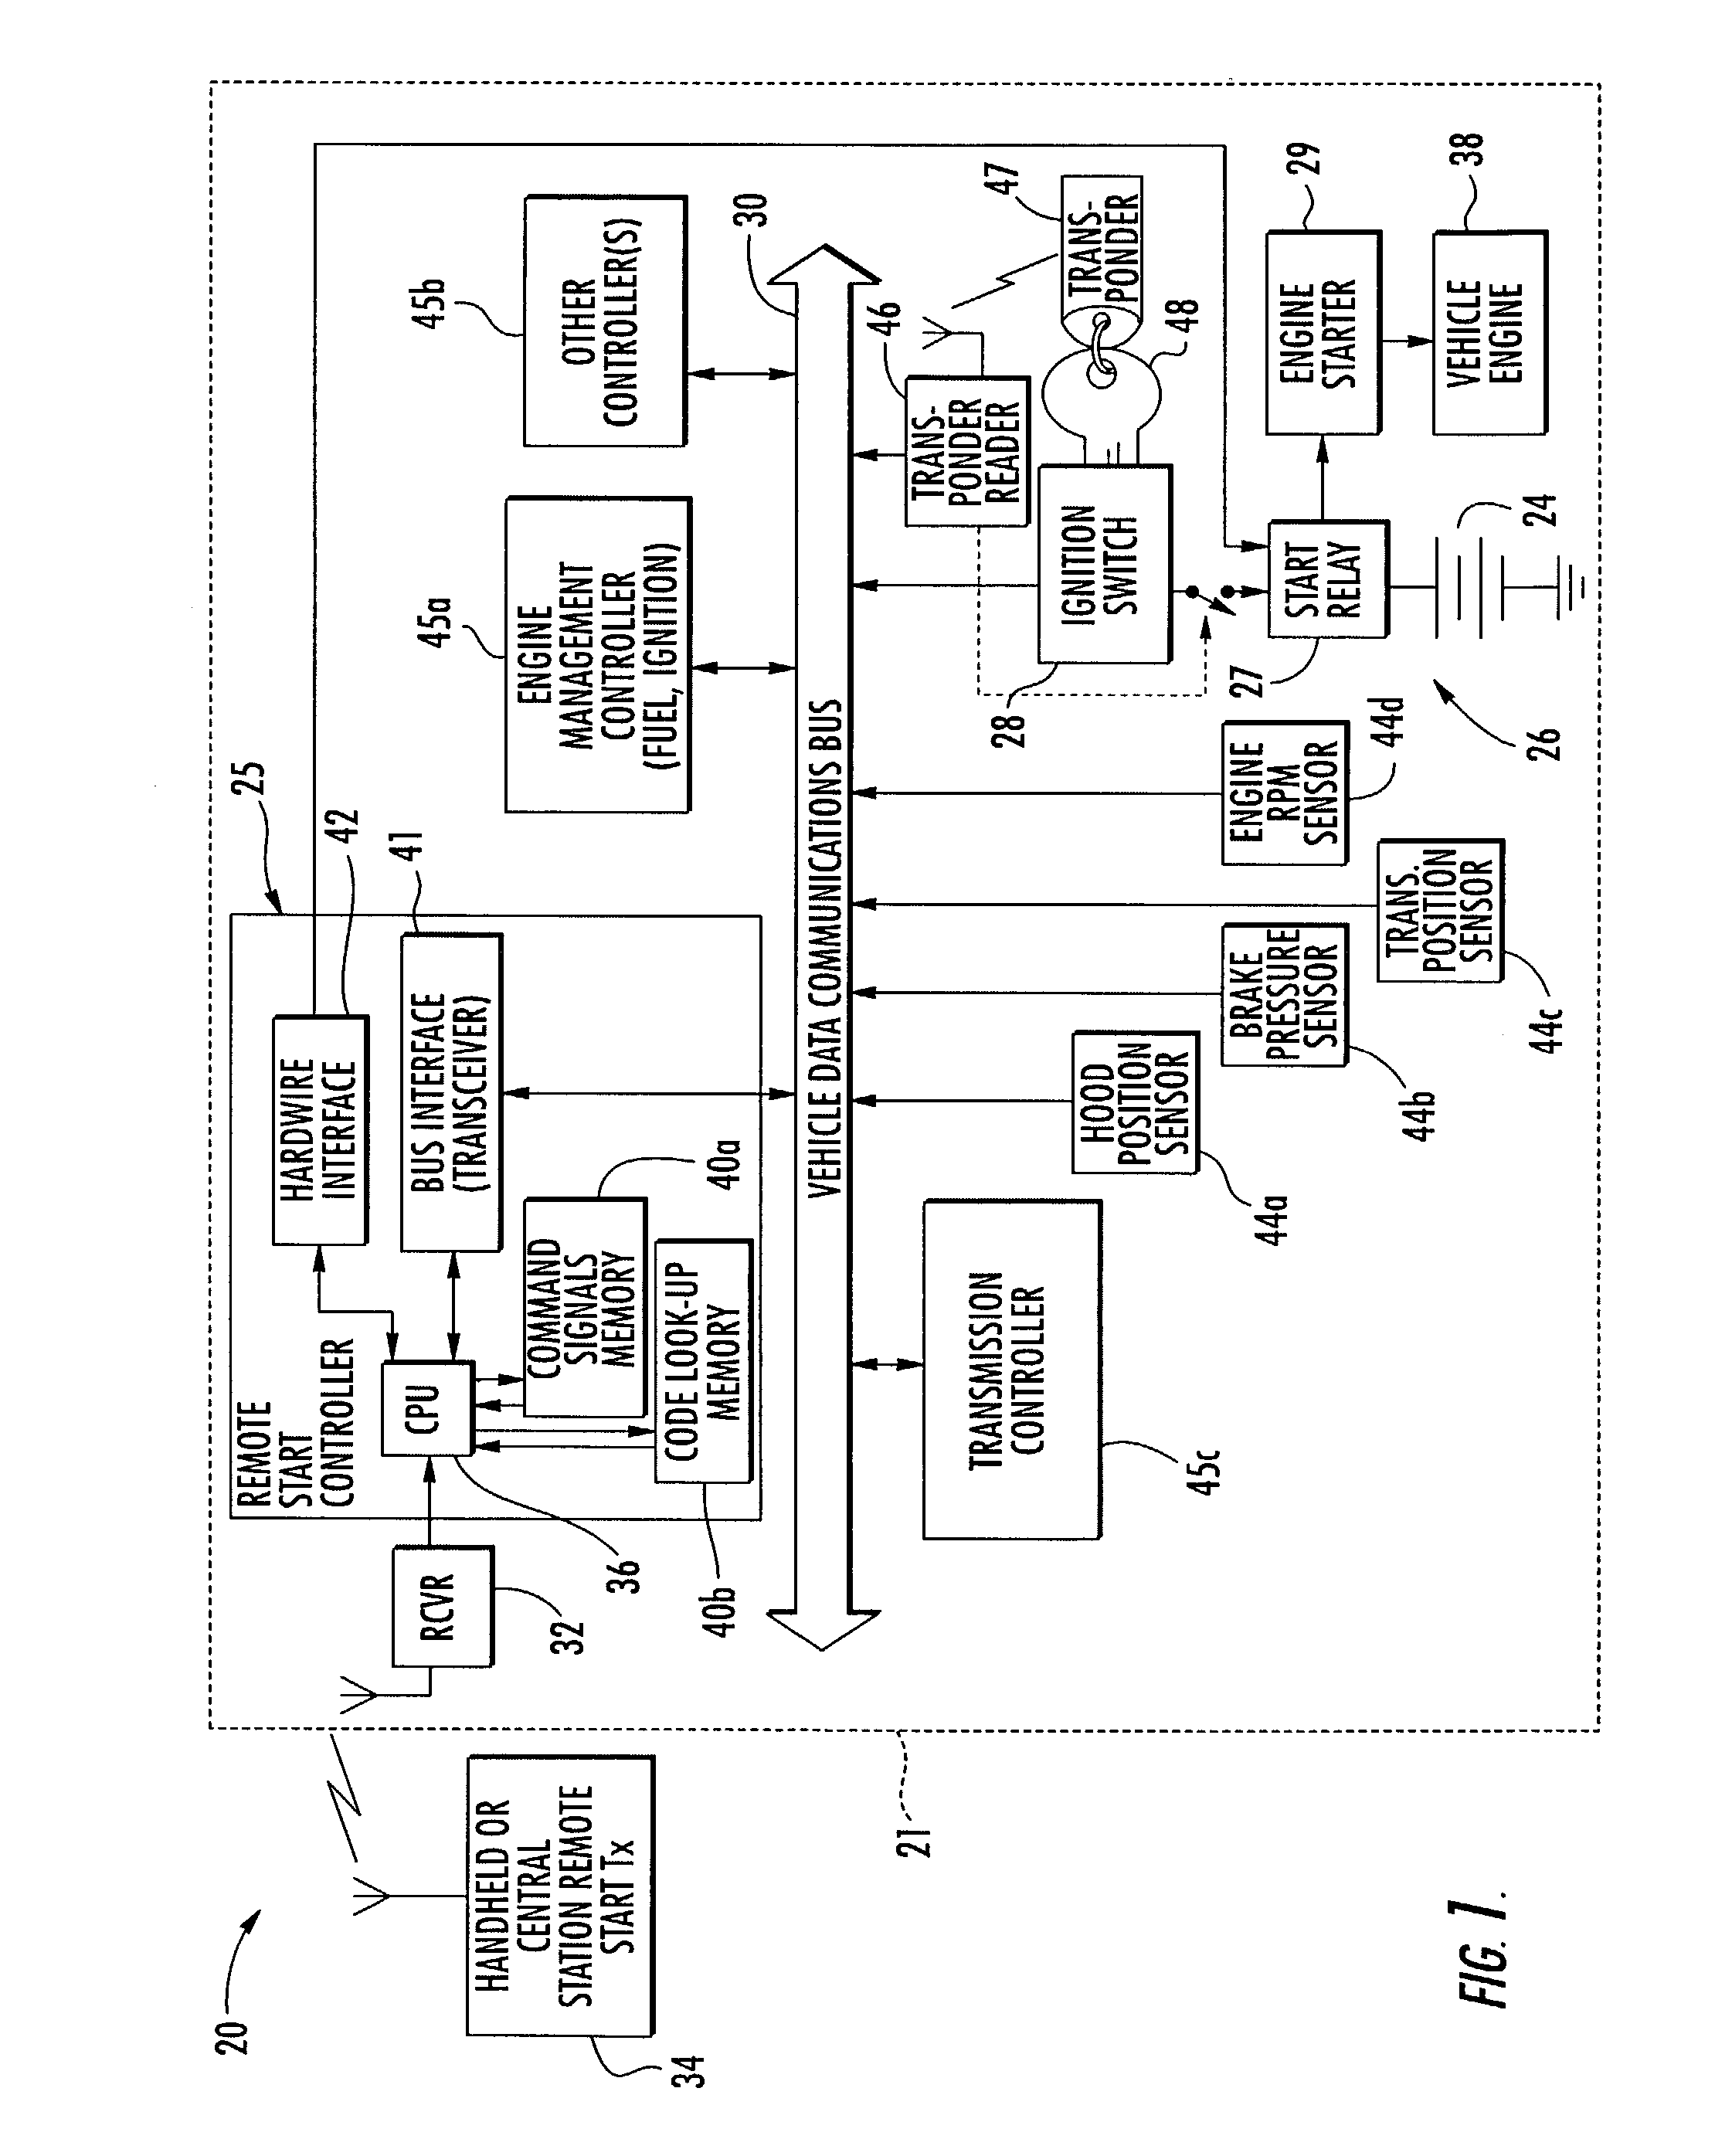 Vehicle window control system for a vehicle having a data communications bus and associated methods